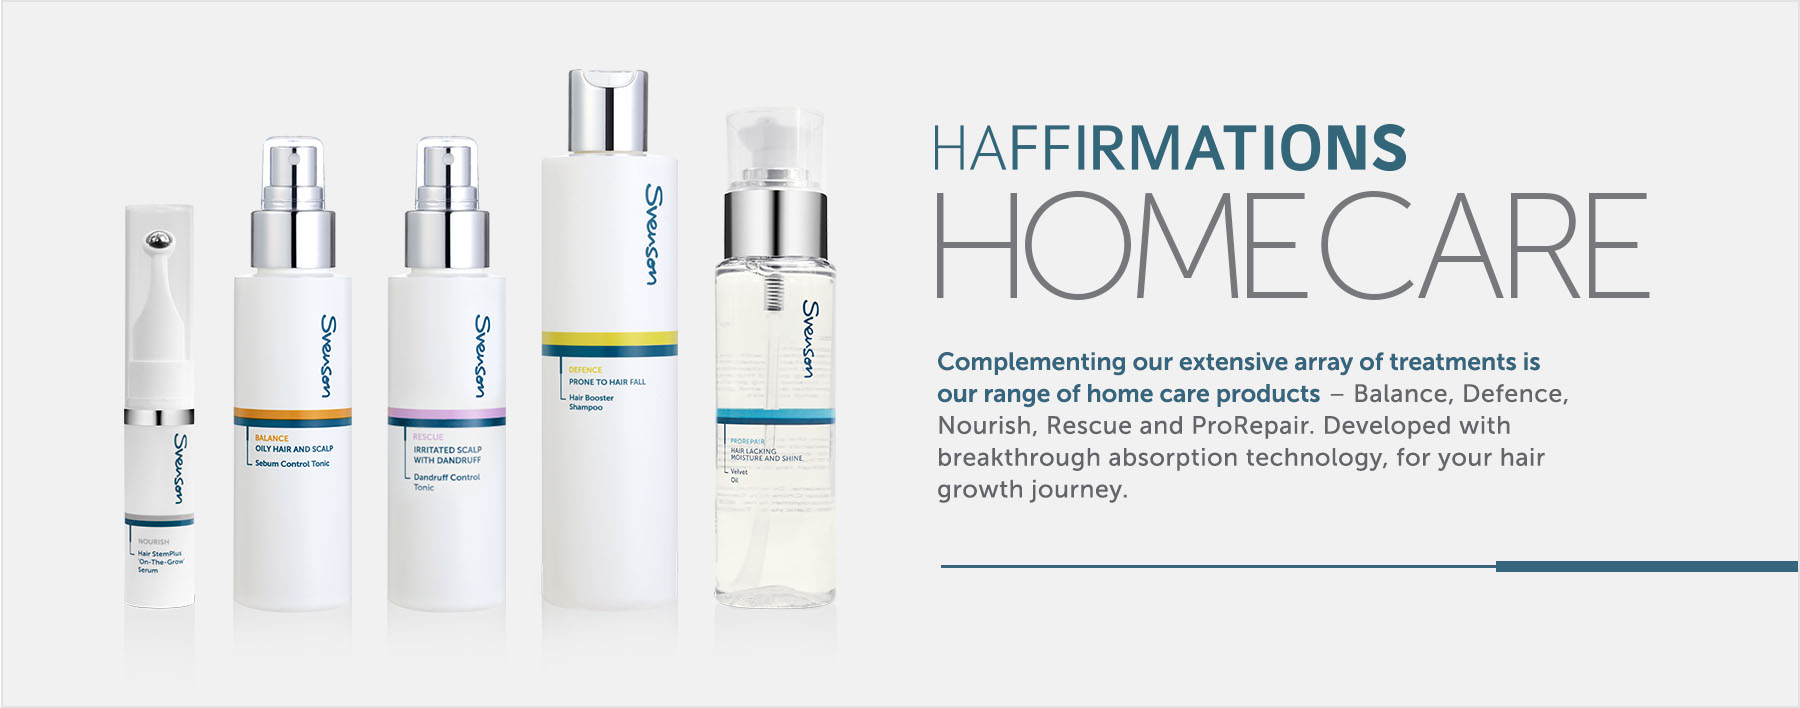 Haffirmations Home Care